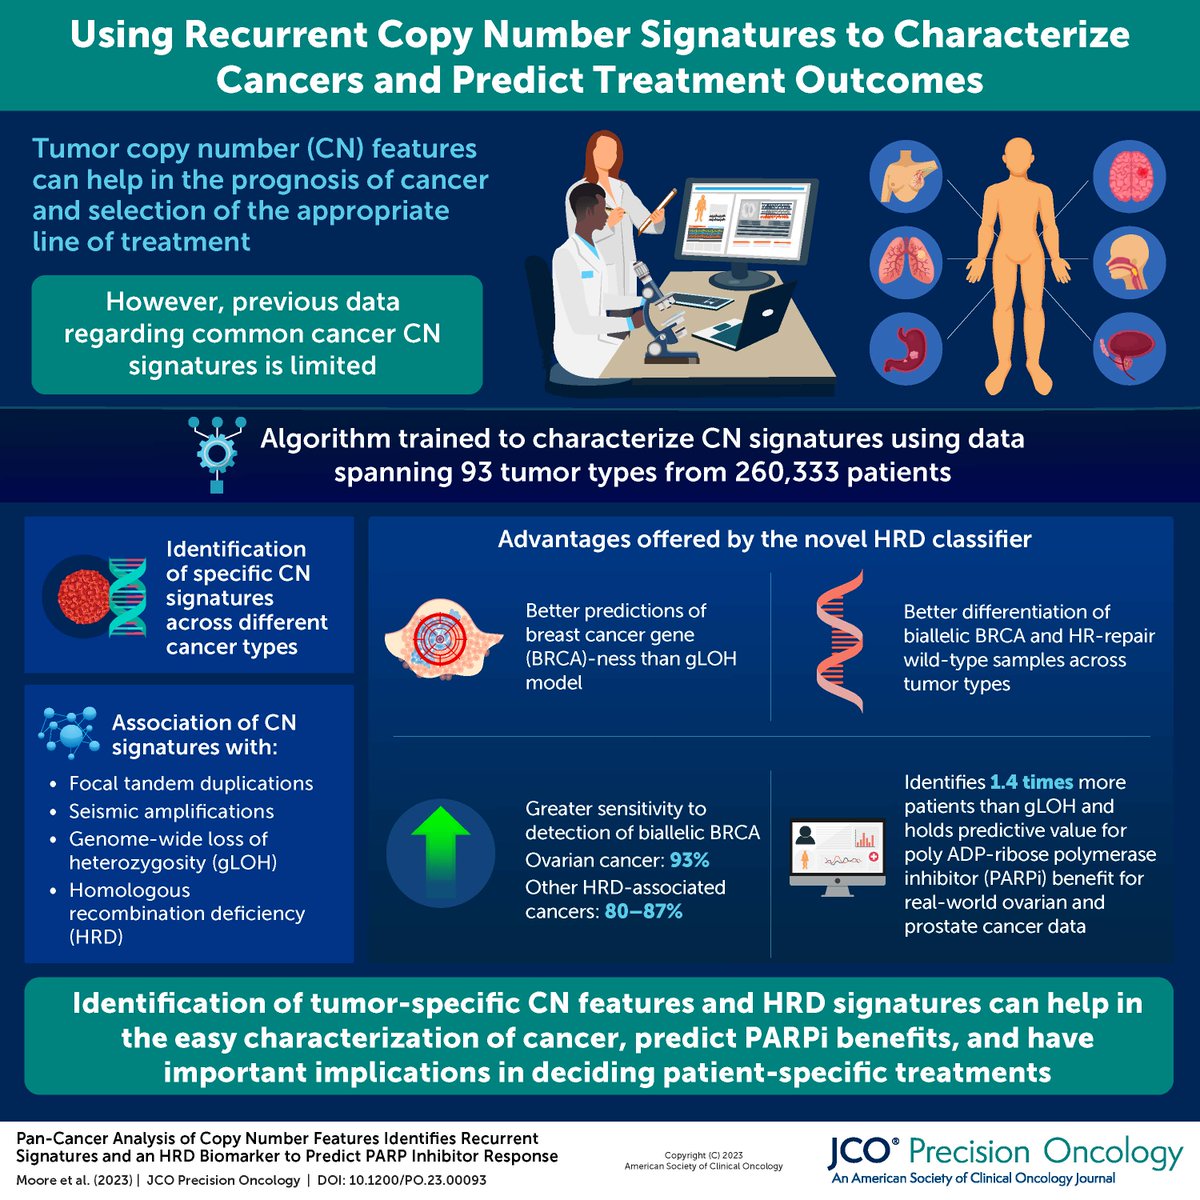 Analysis of 260K tumors IDs copy number signatures and a HRD #biomarker predictive of PARPi response ➡️ brnw.ch/21wDiOI @DX_Jin @EthanSokol #precisionmedicine